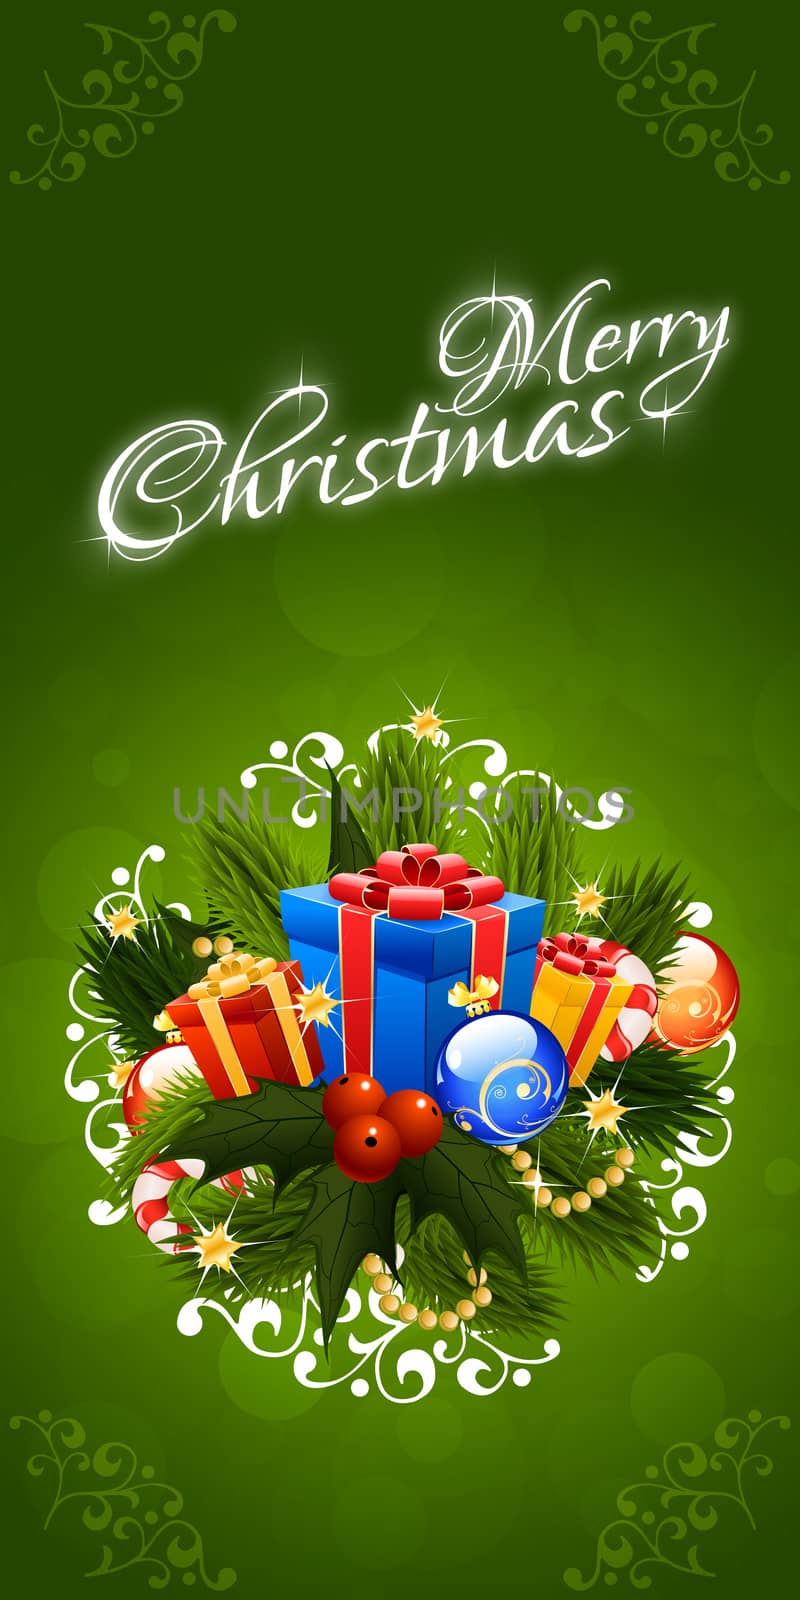 Christmas Greeting Card. Merry Christmas lettering by WaD